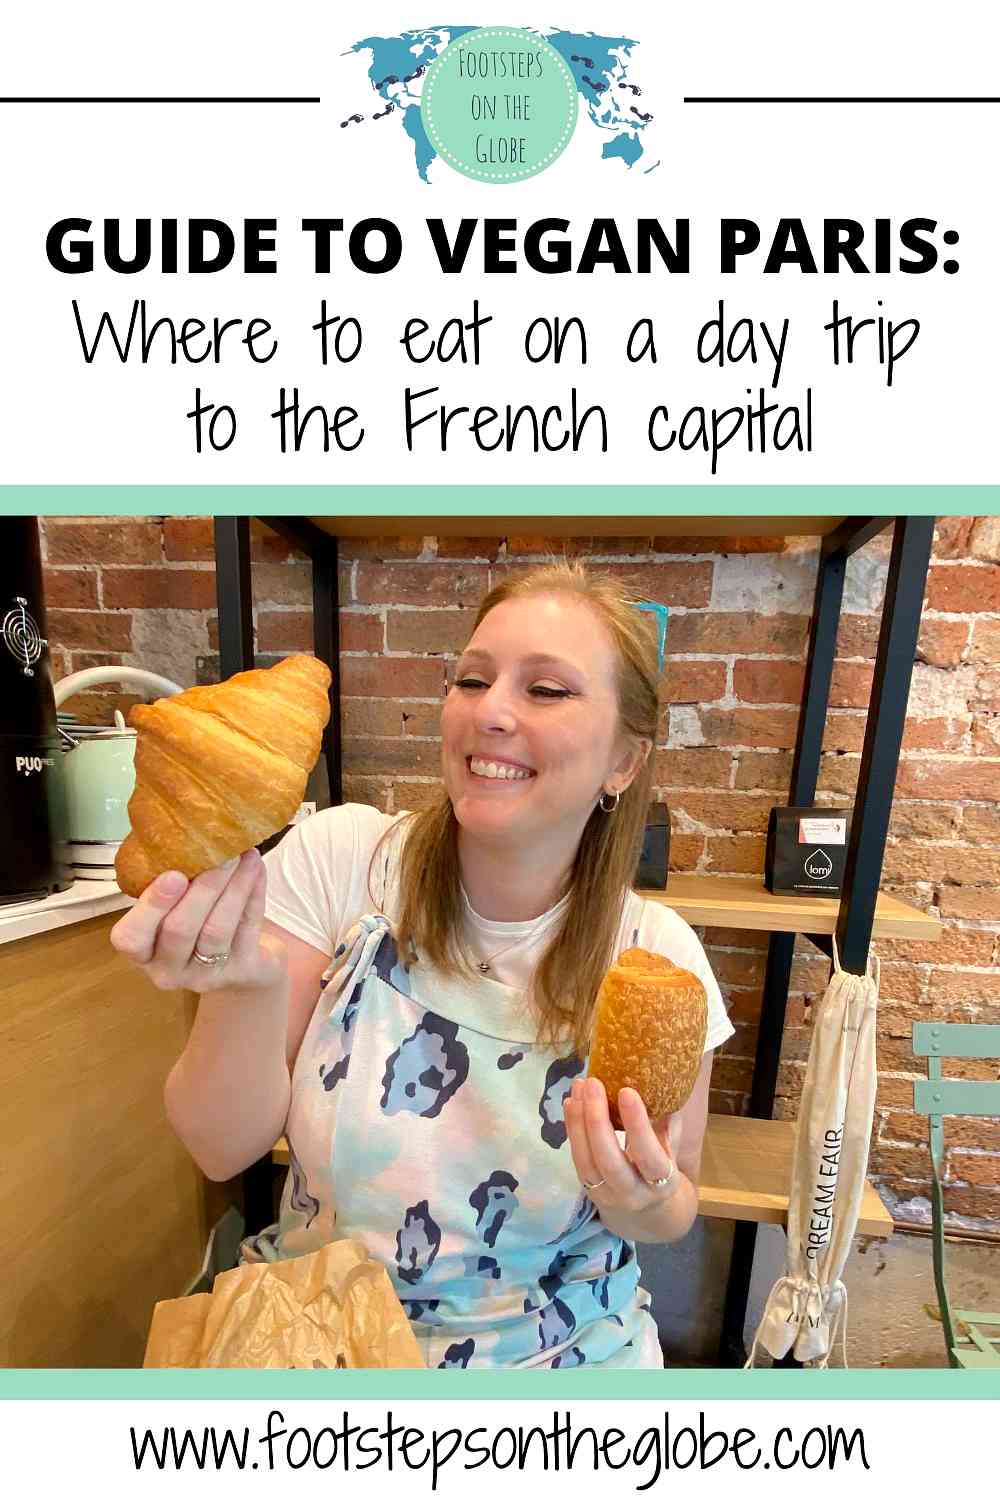 Mel holding and looking at croissants in Land and Monkeys bakery in Paris with the text: "Guide to vegan Paris" Pinterest image